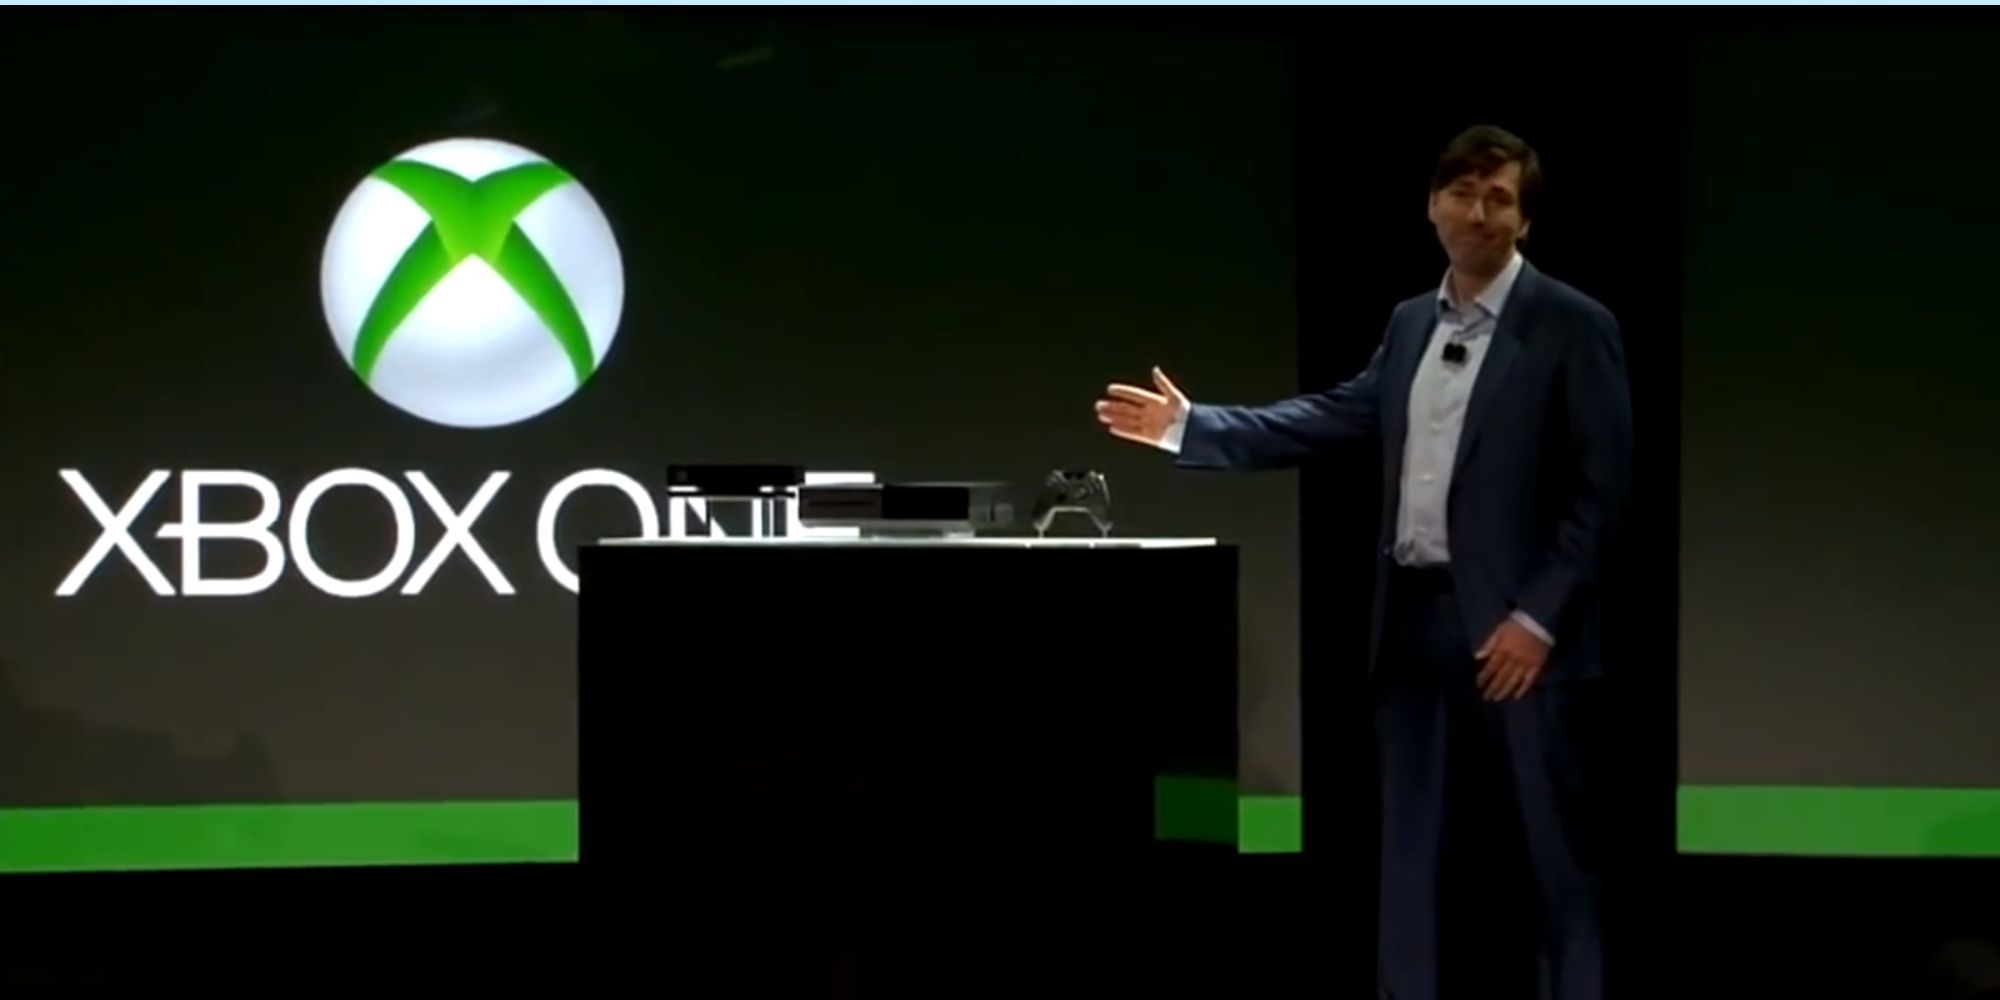 Xbox One reveal with former Xbox Head Don Mattrick